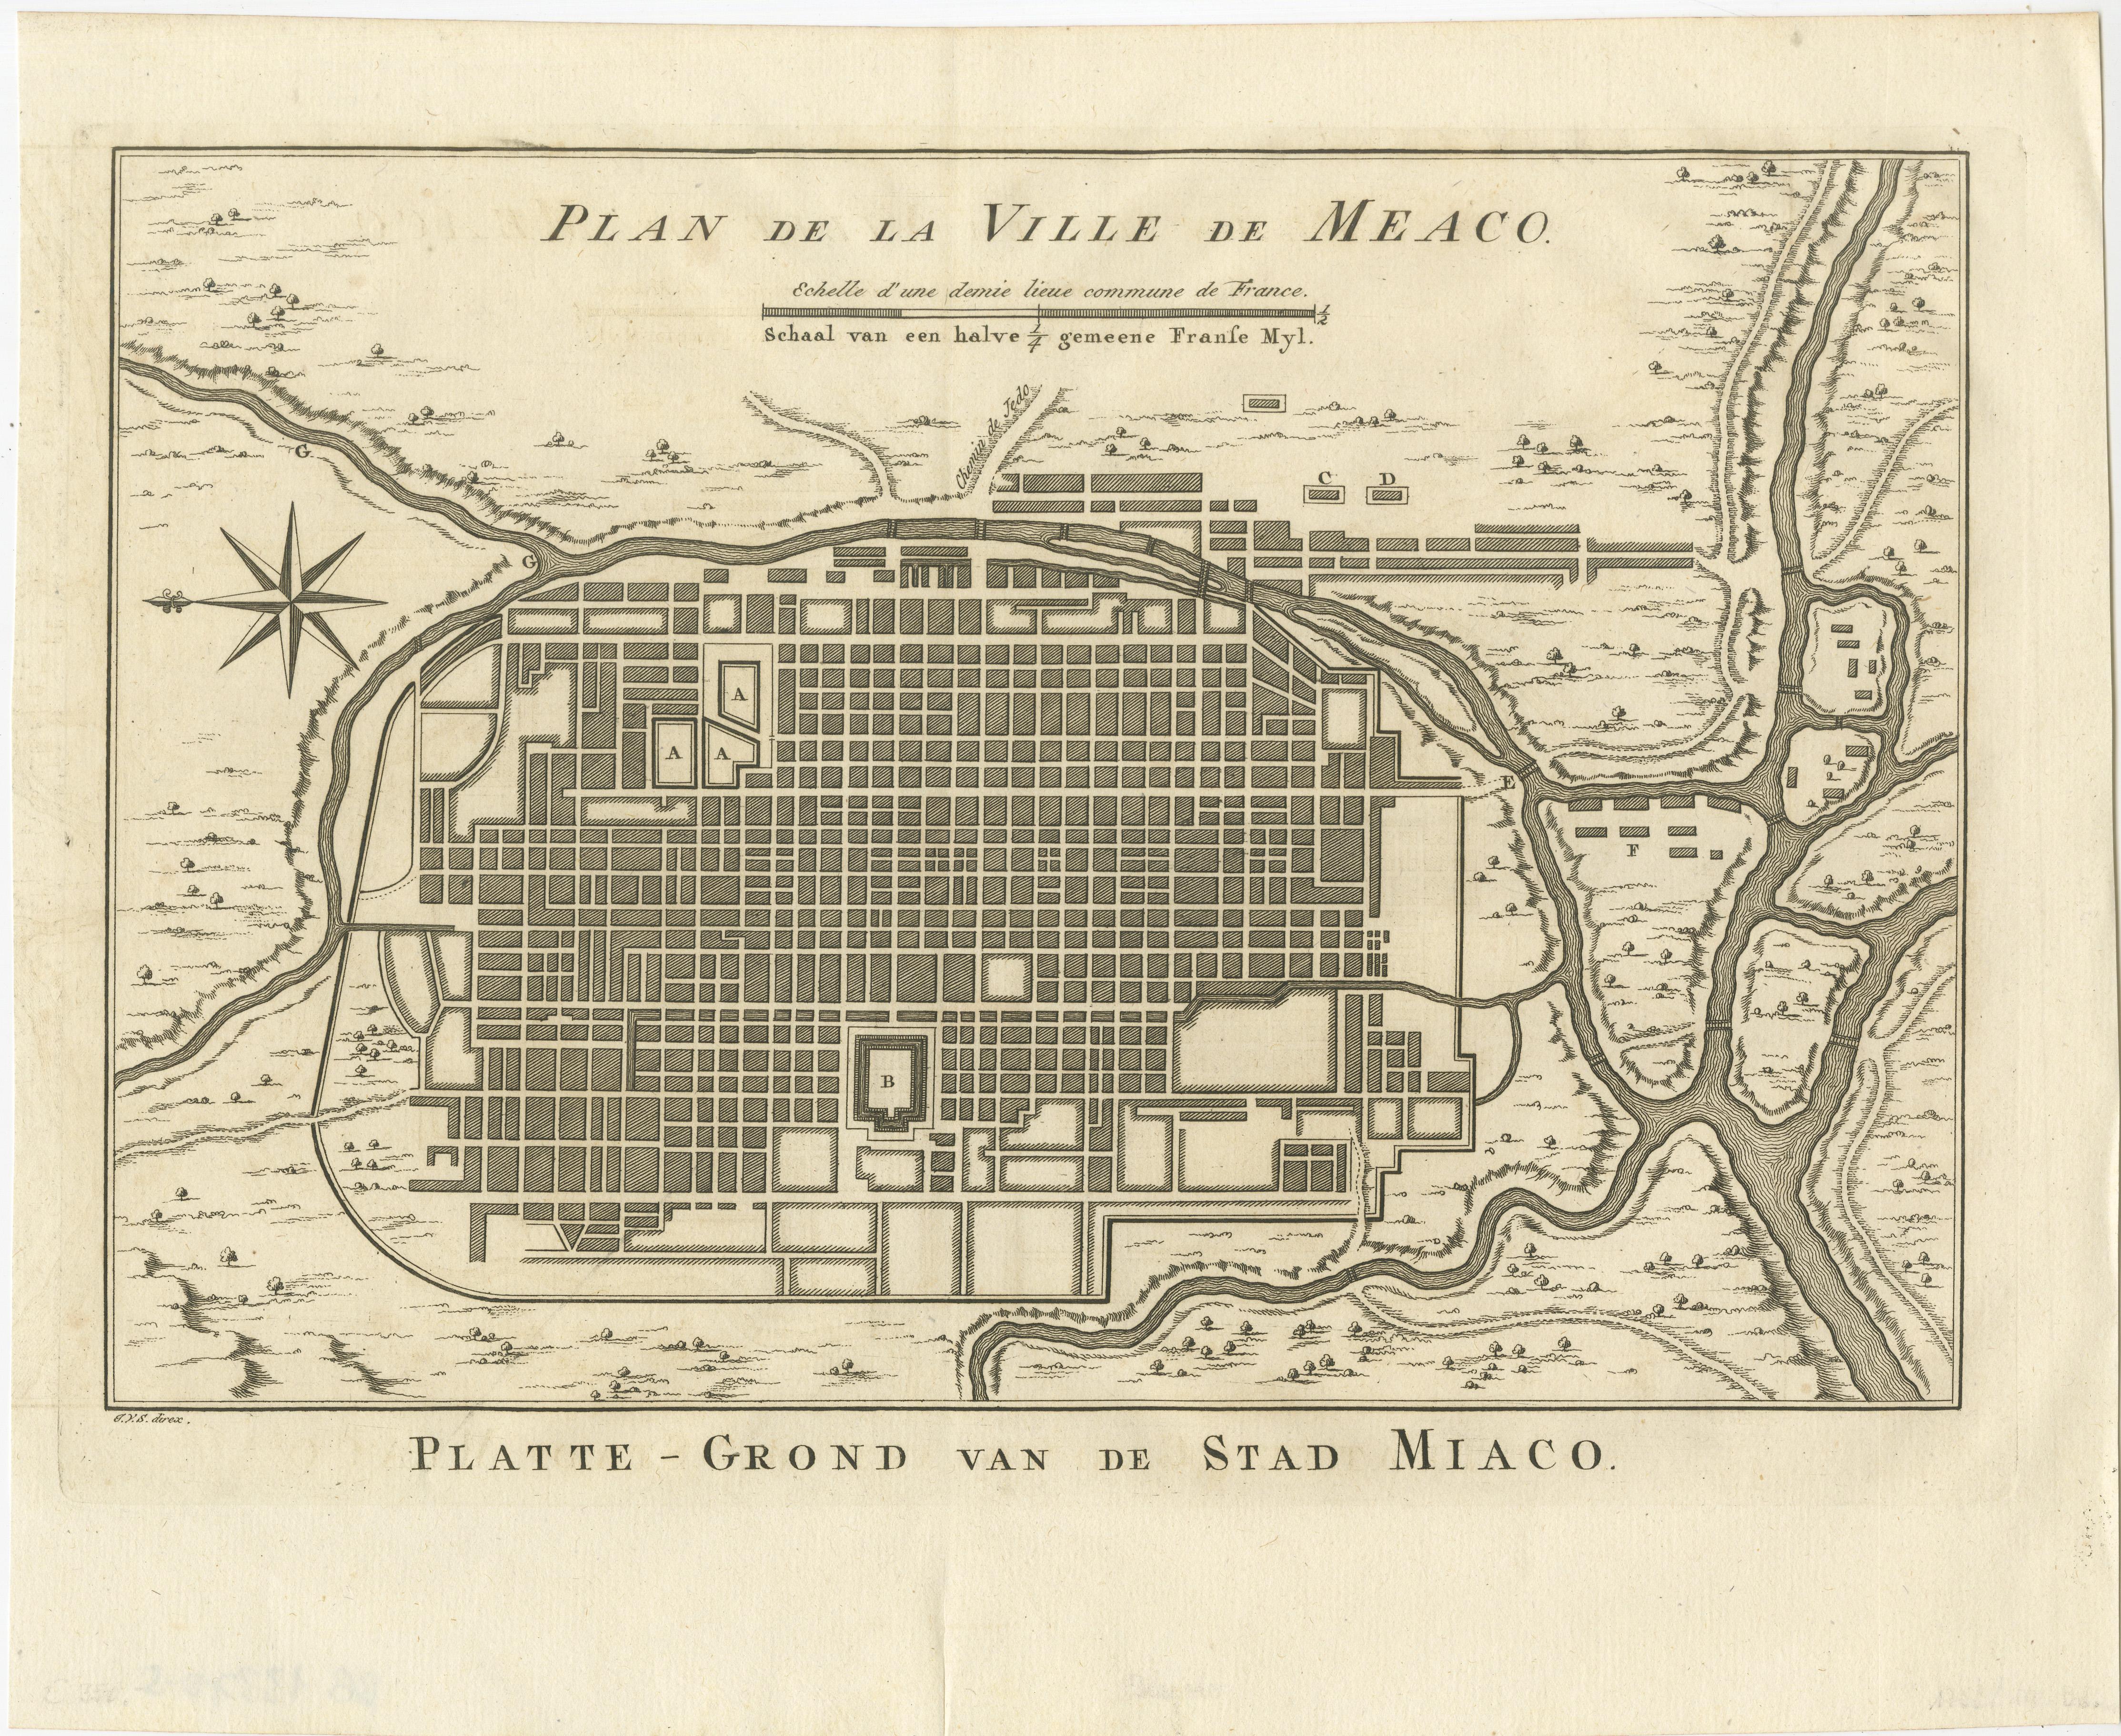 Antique map titled 'Plan de la Ville de Meaco - Platte-Grond van de Stad Miaco'. Detailed and unusual antique copper engraved plan of Kyoto, ancient named Meaco, when it was the capital of Japan. The block pattern of the city is laid out and is